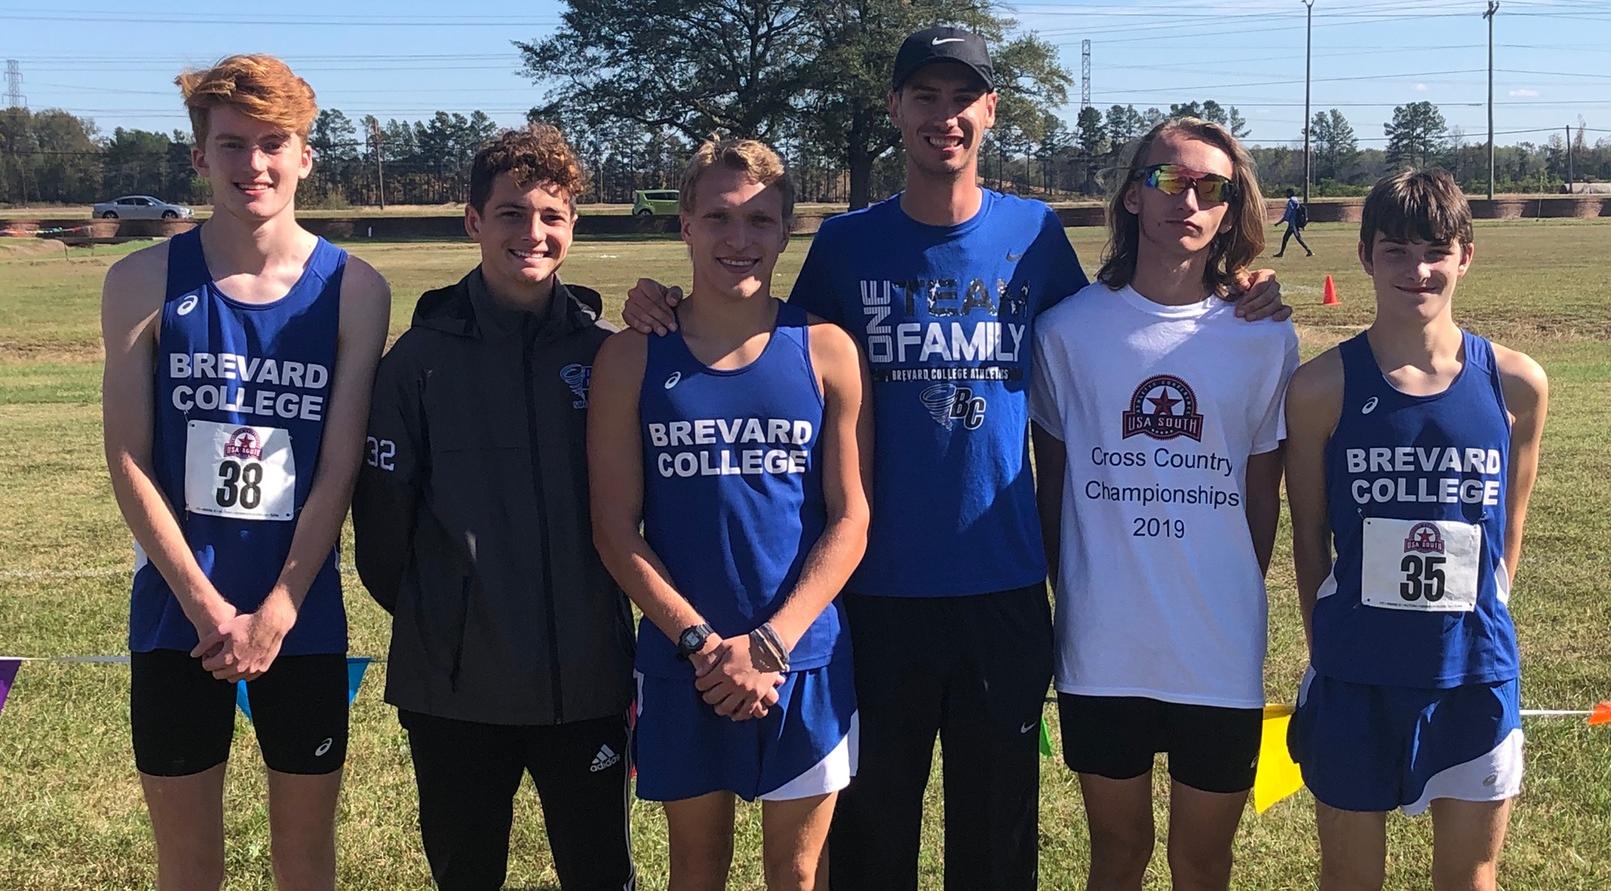 The 2019 BC Men's Cross Country Team, Pictured L/R: Miles Schafer, Dylan Freeman, Solomon Turner, Head Coach Darryll Patrick, All-Conference Second Team Selection Gavin Morgan, and Michael Fader.